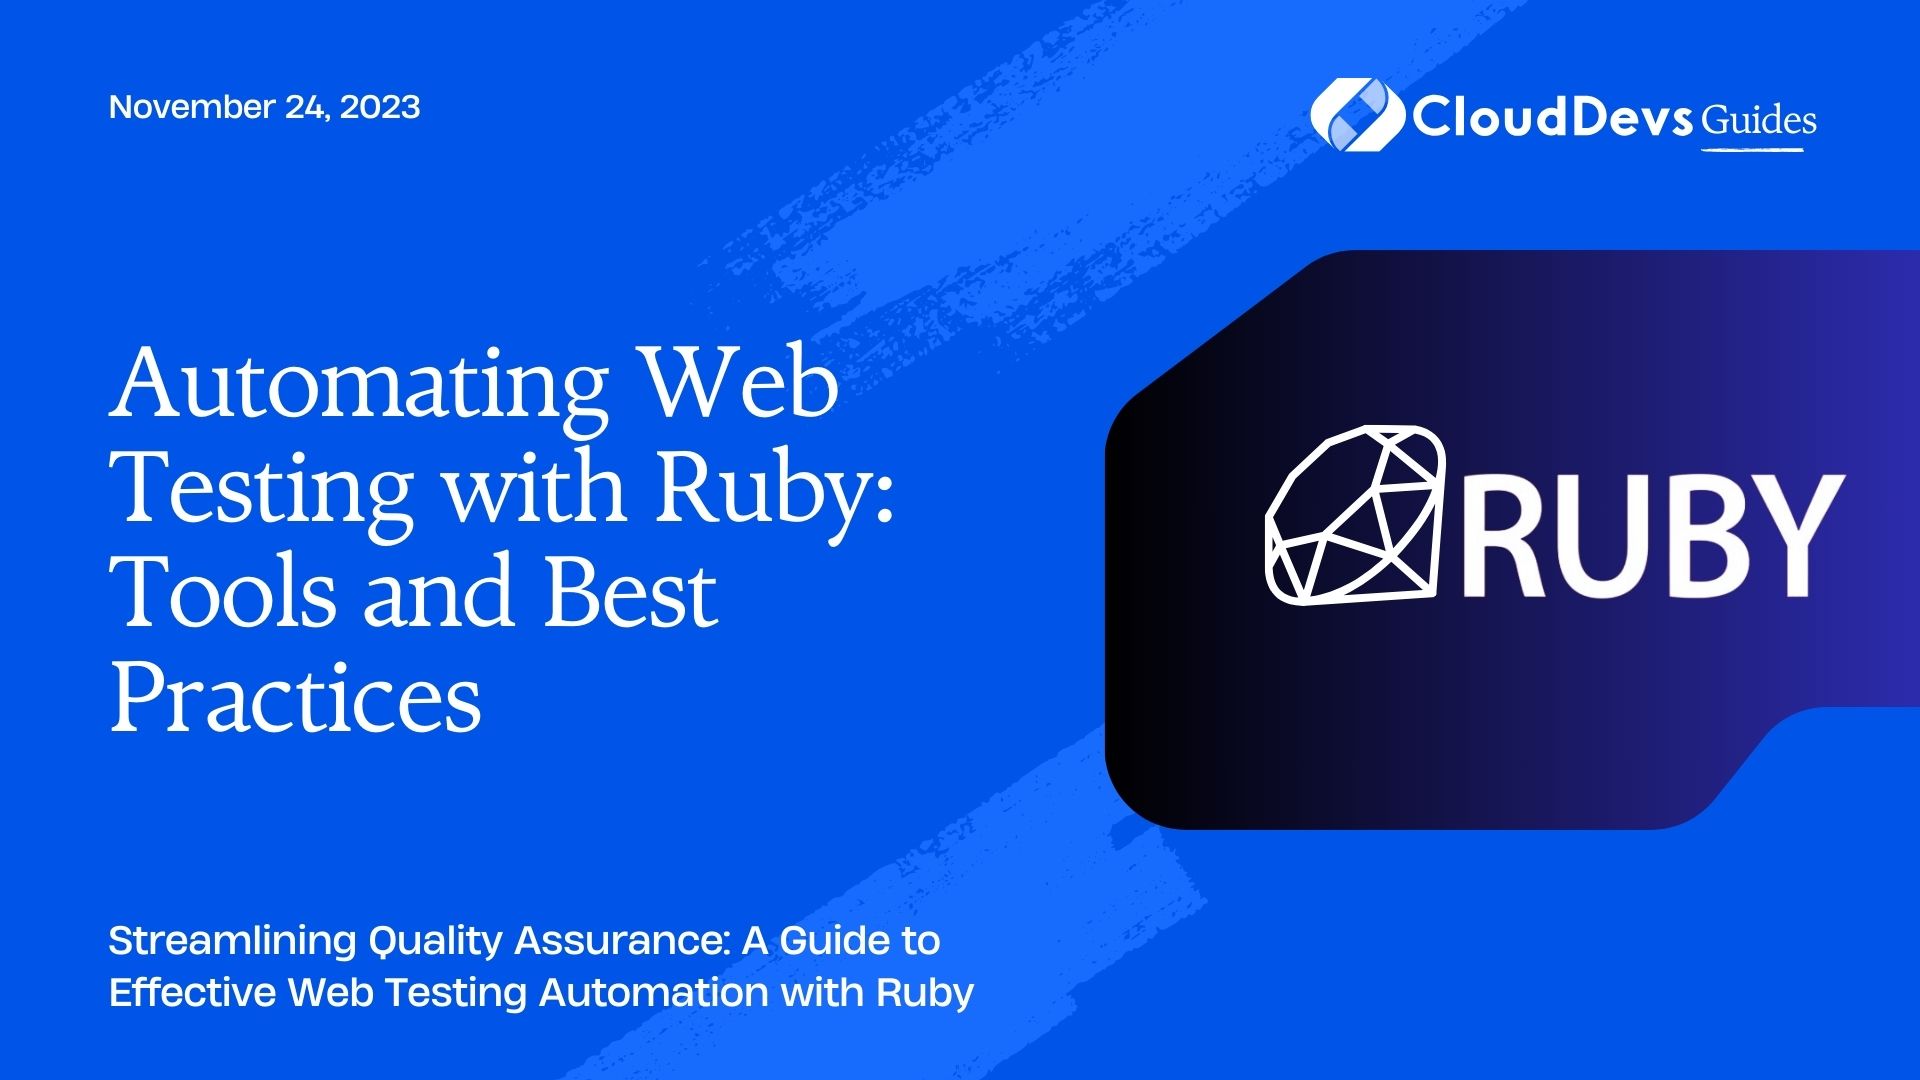 Automating Web Testing with Ruby: Tools and Best Practices